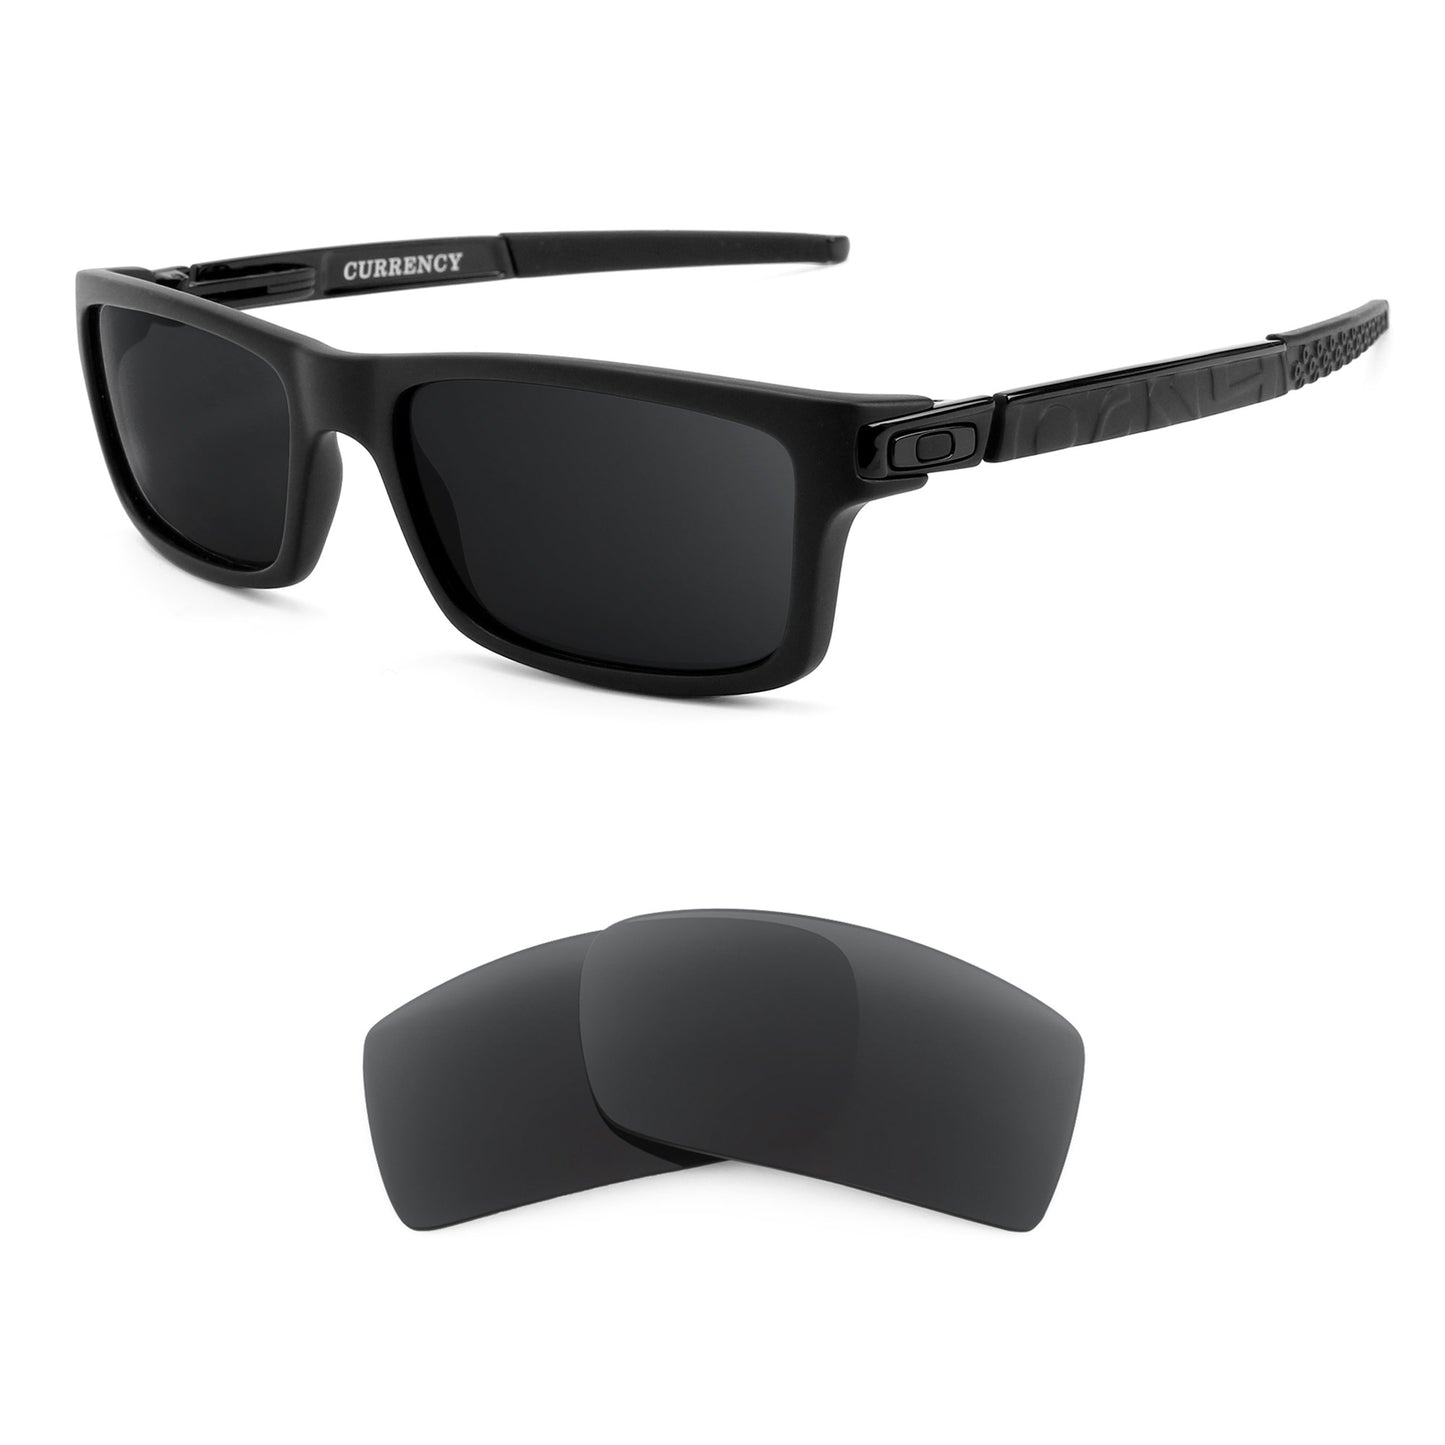 Oakley Currency 54 sunglasses with replacement lenses